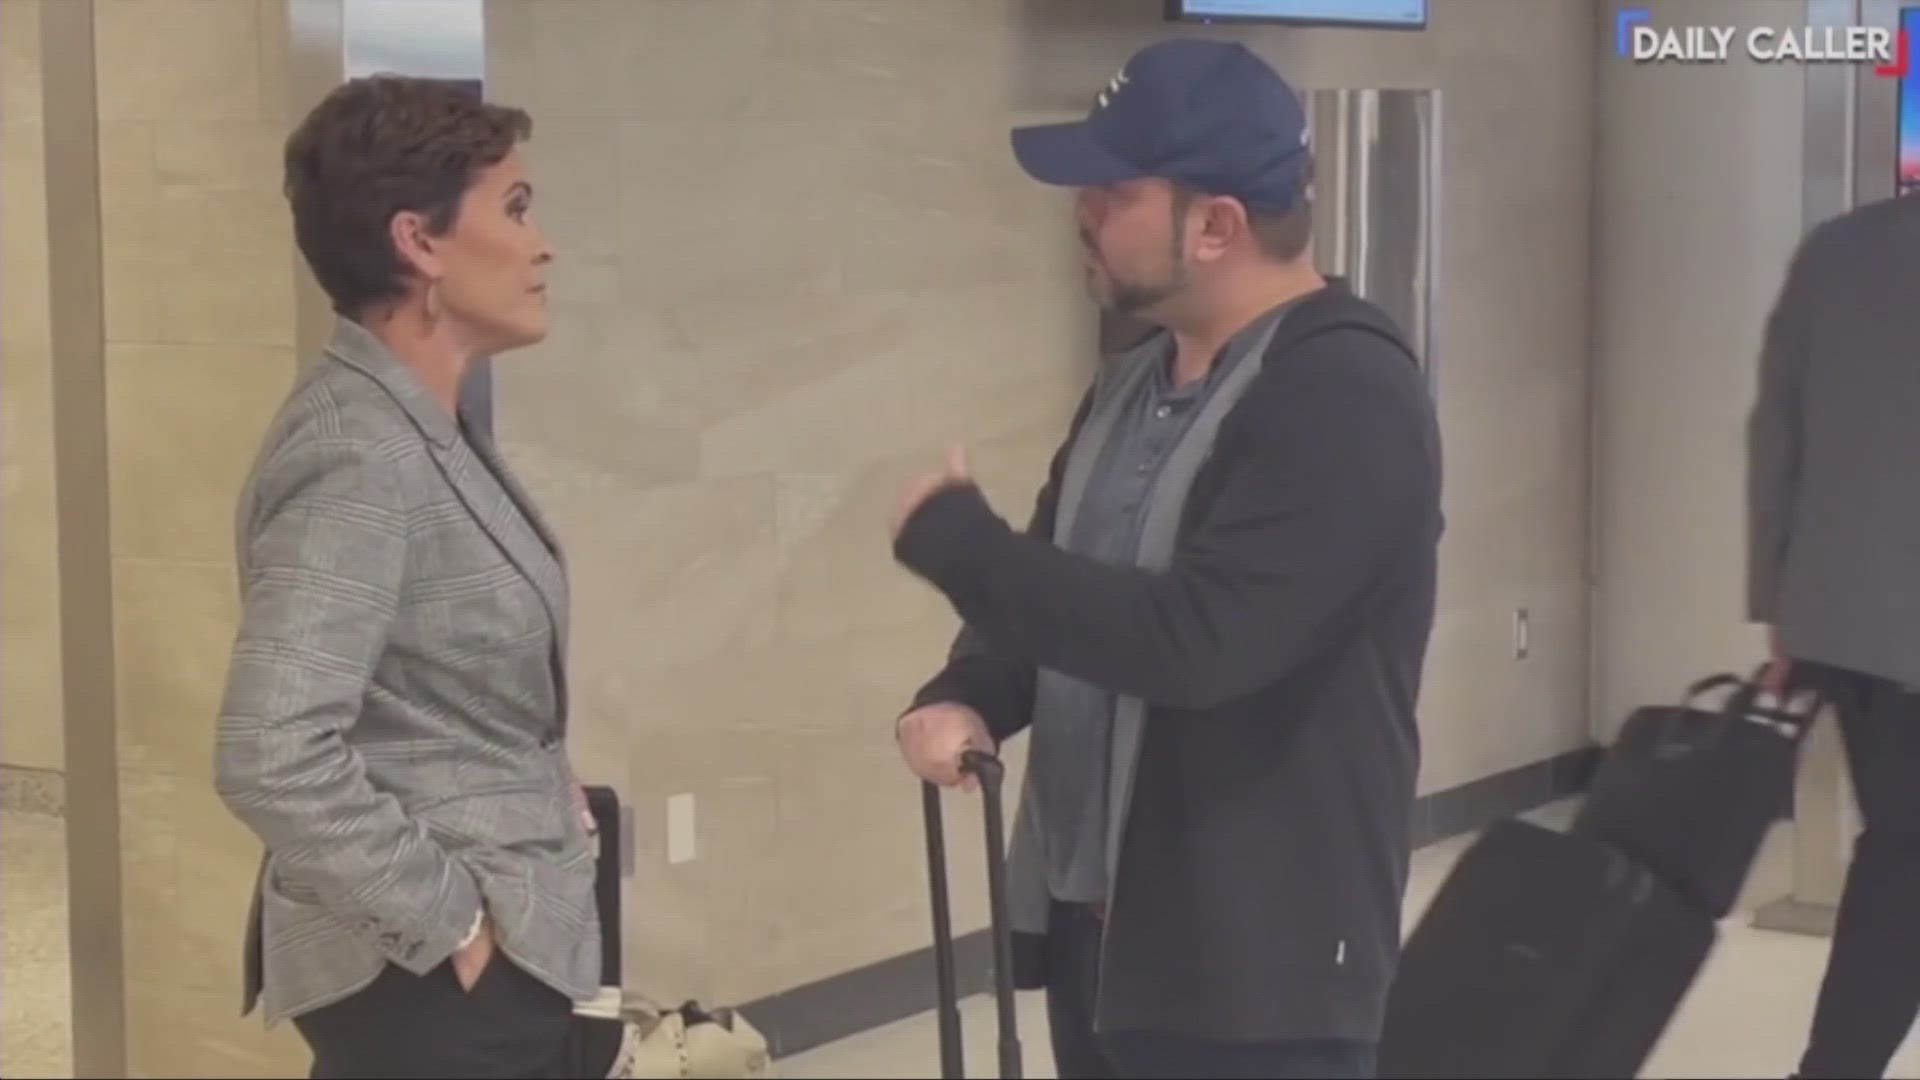 Video shows Kari Lake and Rep. Ruben Gallego in heated confrontation at Sky Harbor Airport